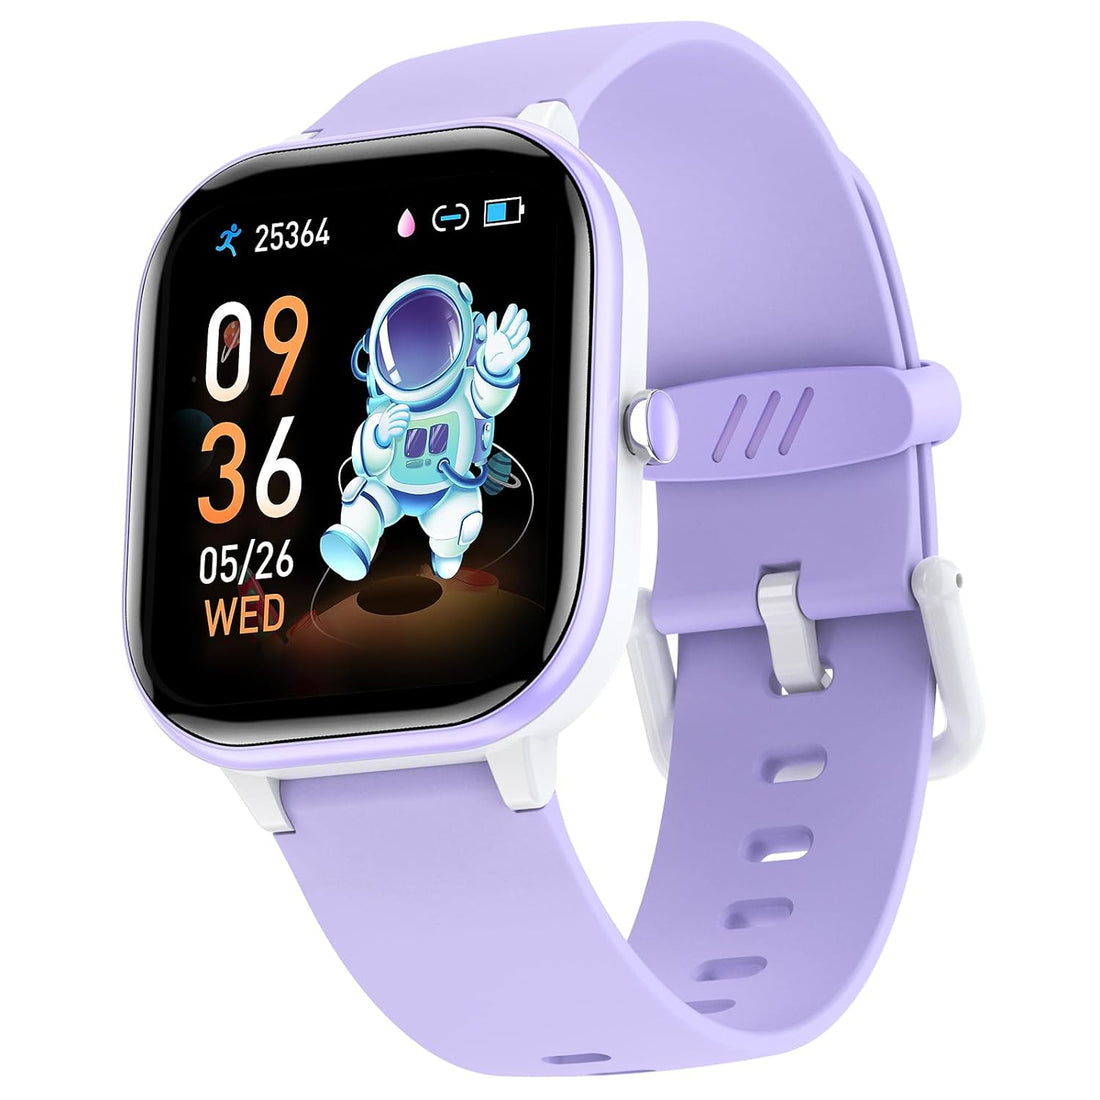 ZURURU Kids Smart Watch for Boys Girls Teens Gifts Idea for 6-14 Years Old, Kids Fitness Tracker Sleep Monitor Step Counter Stop Watch Pedometer Alarm Clock DIY Watch Face Touch Screen